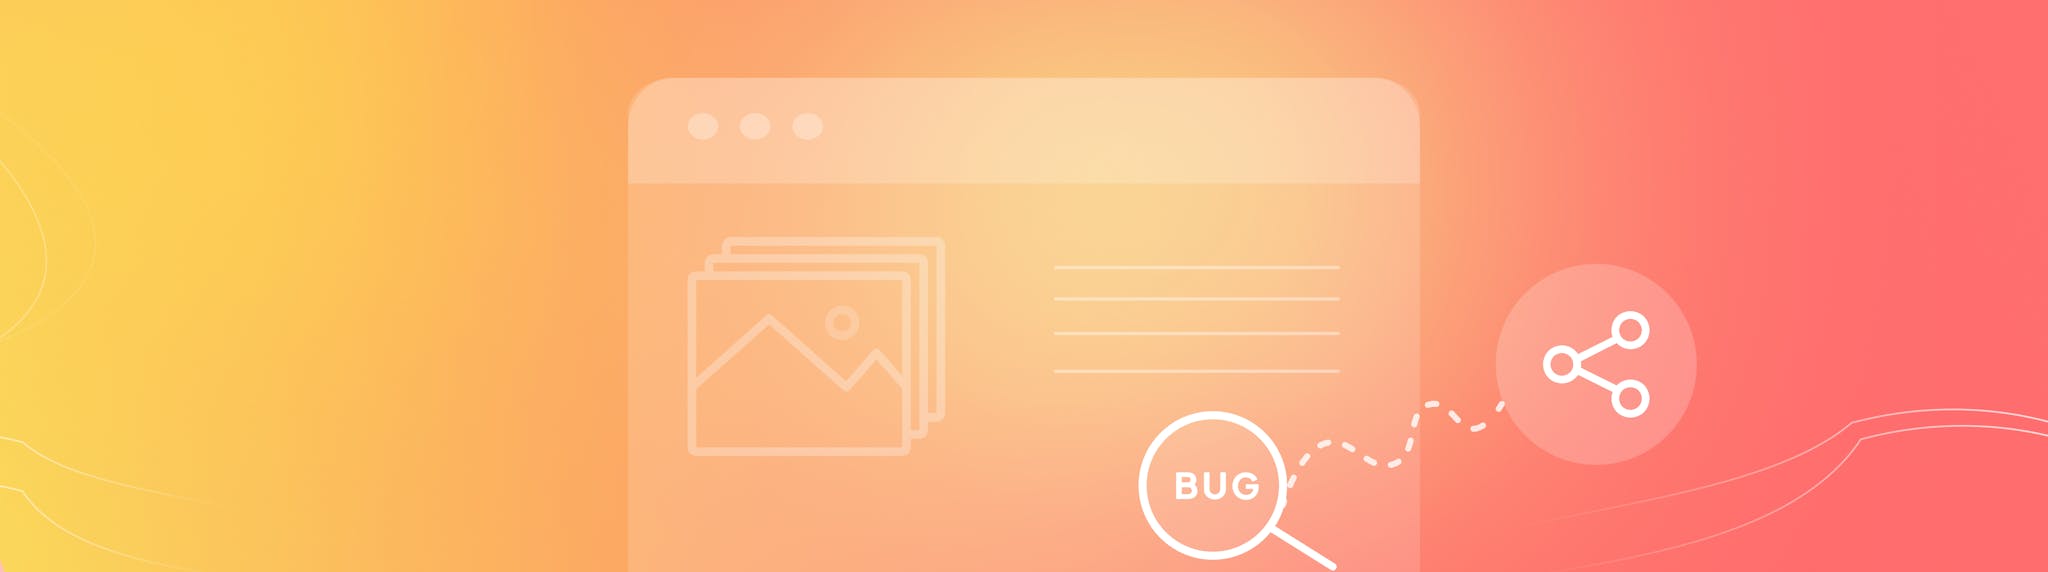 How to Report a Bug: Tips for QA Efficiency